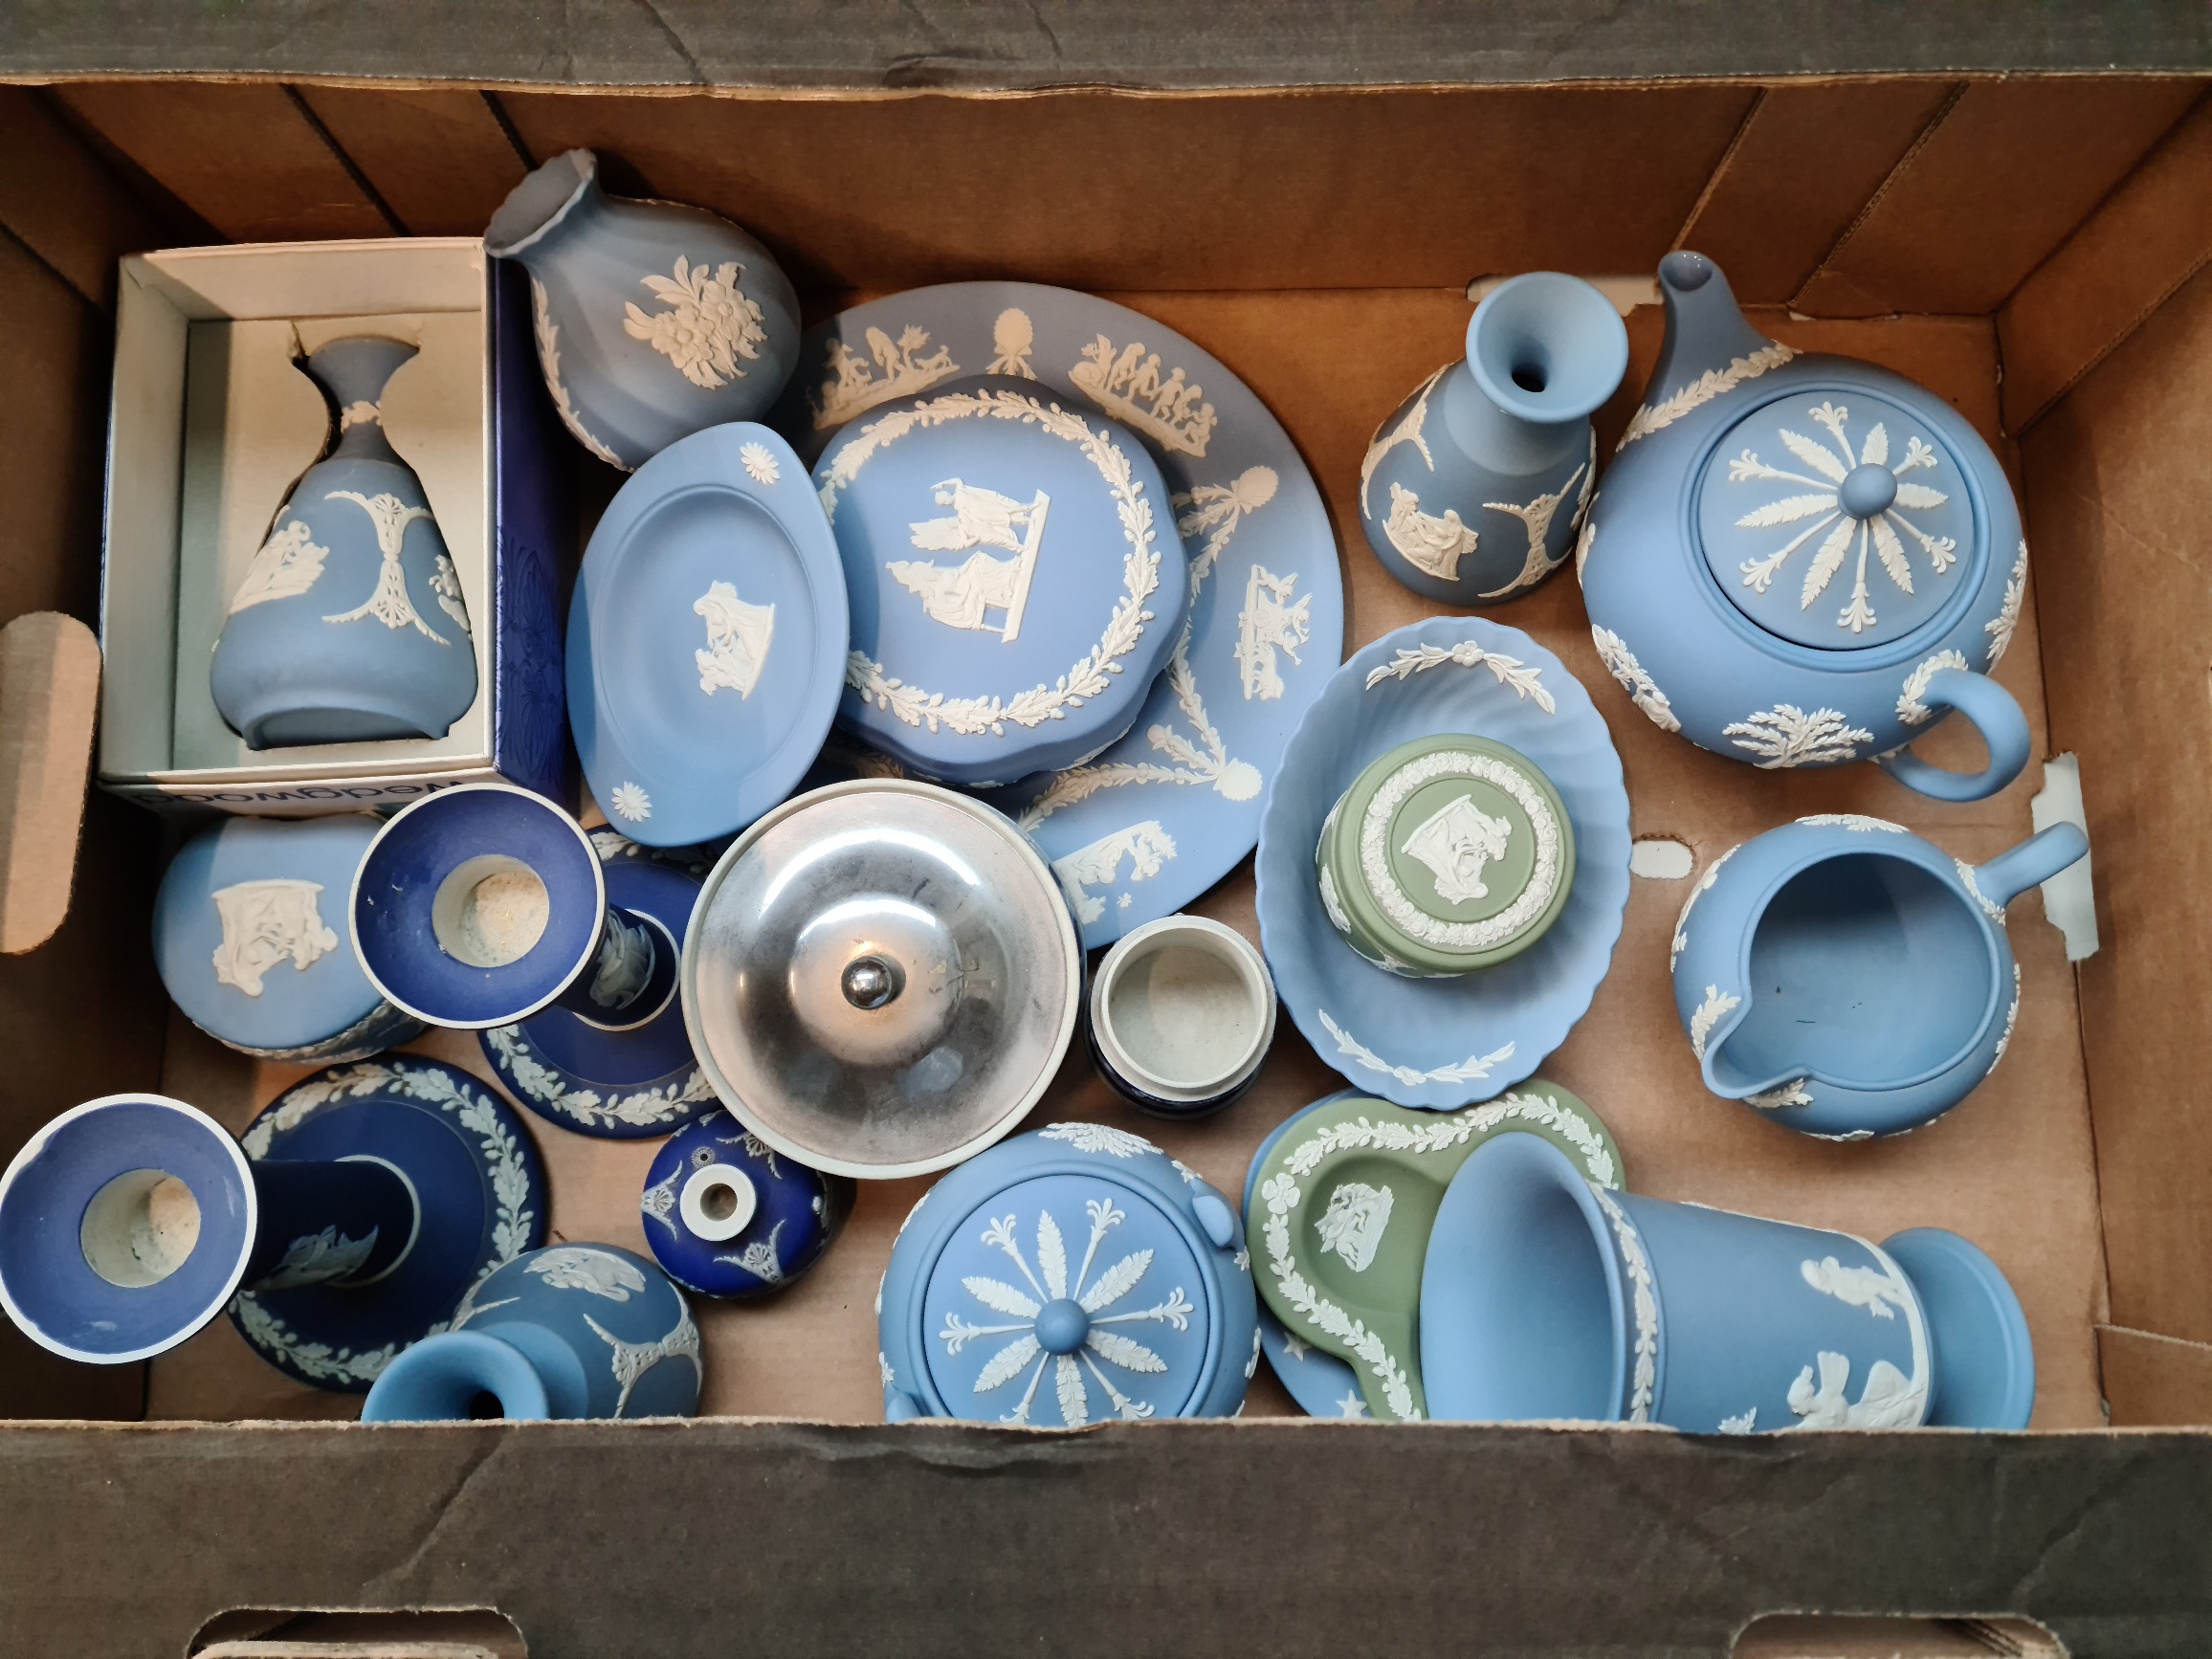 A box of Wedgwood Jasperware to include teapot - 22 pieces.